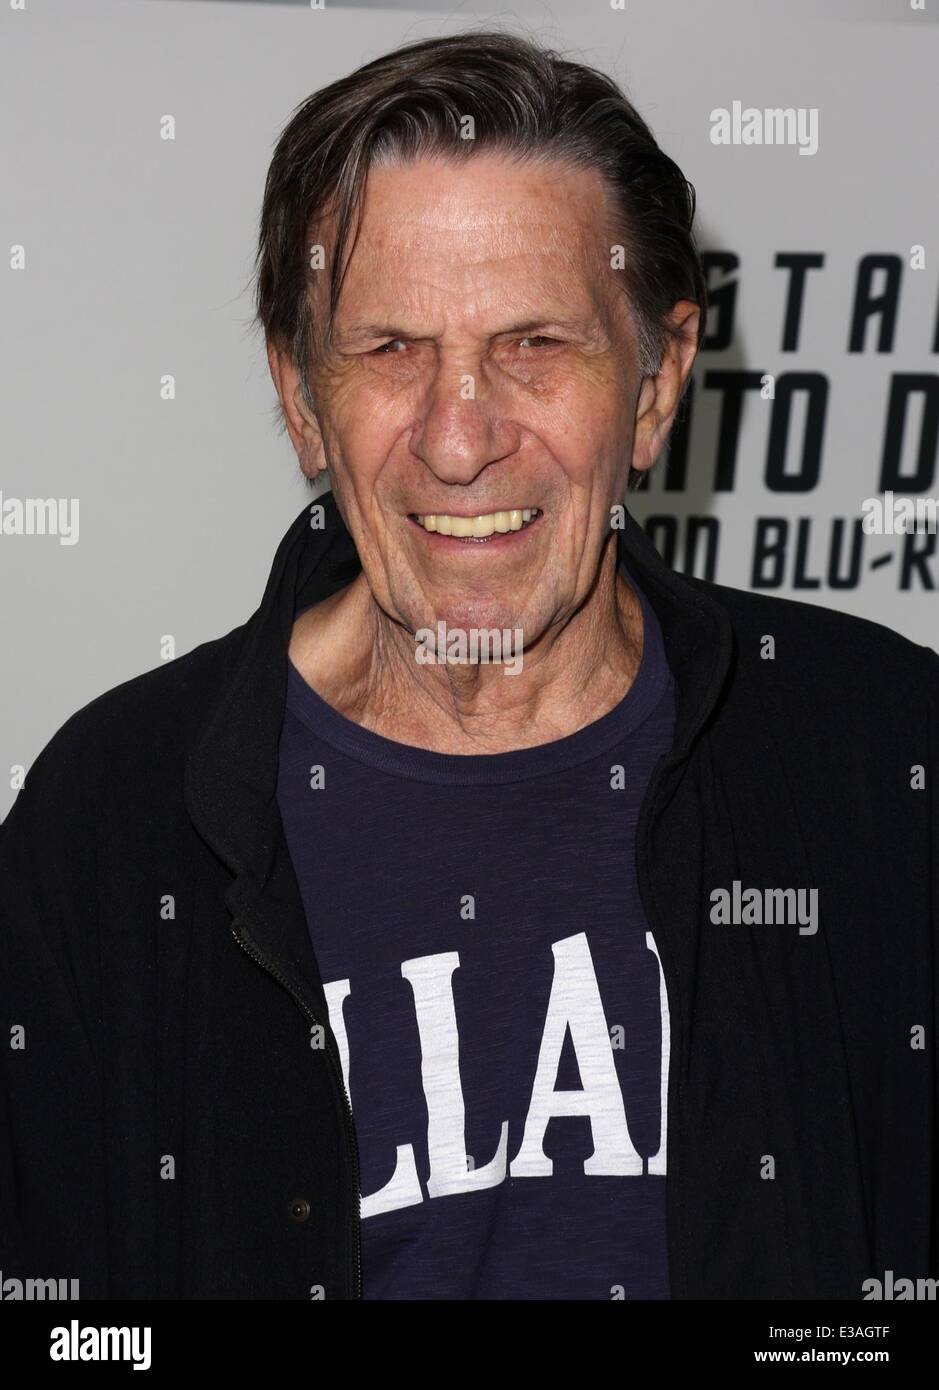 Celebrities attend STAR TREK INTO DARKNESS Blu-ray and DVD debut at California Science Center.  Featuring: Leonard Nimoy Where: Los Angeles, CA, United States When: 10 Sep 2013 Stock Photo